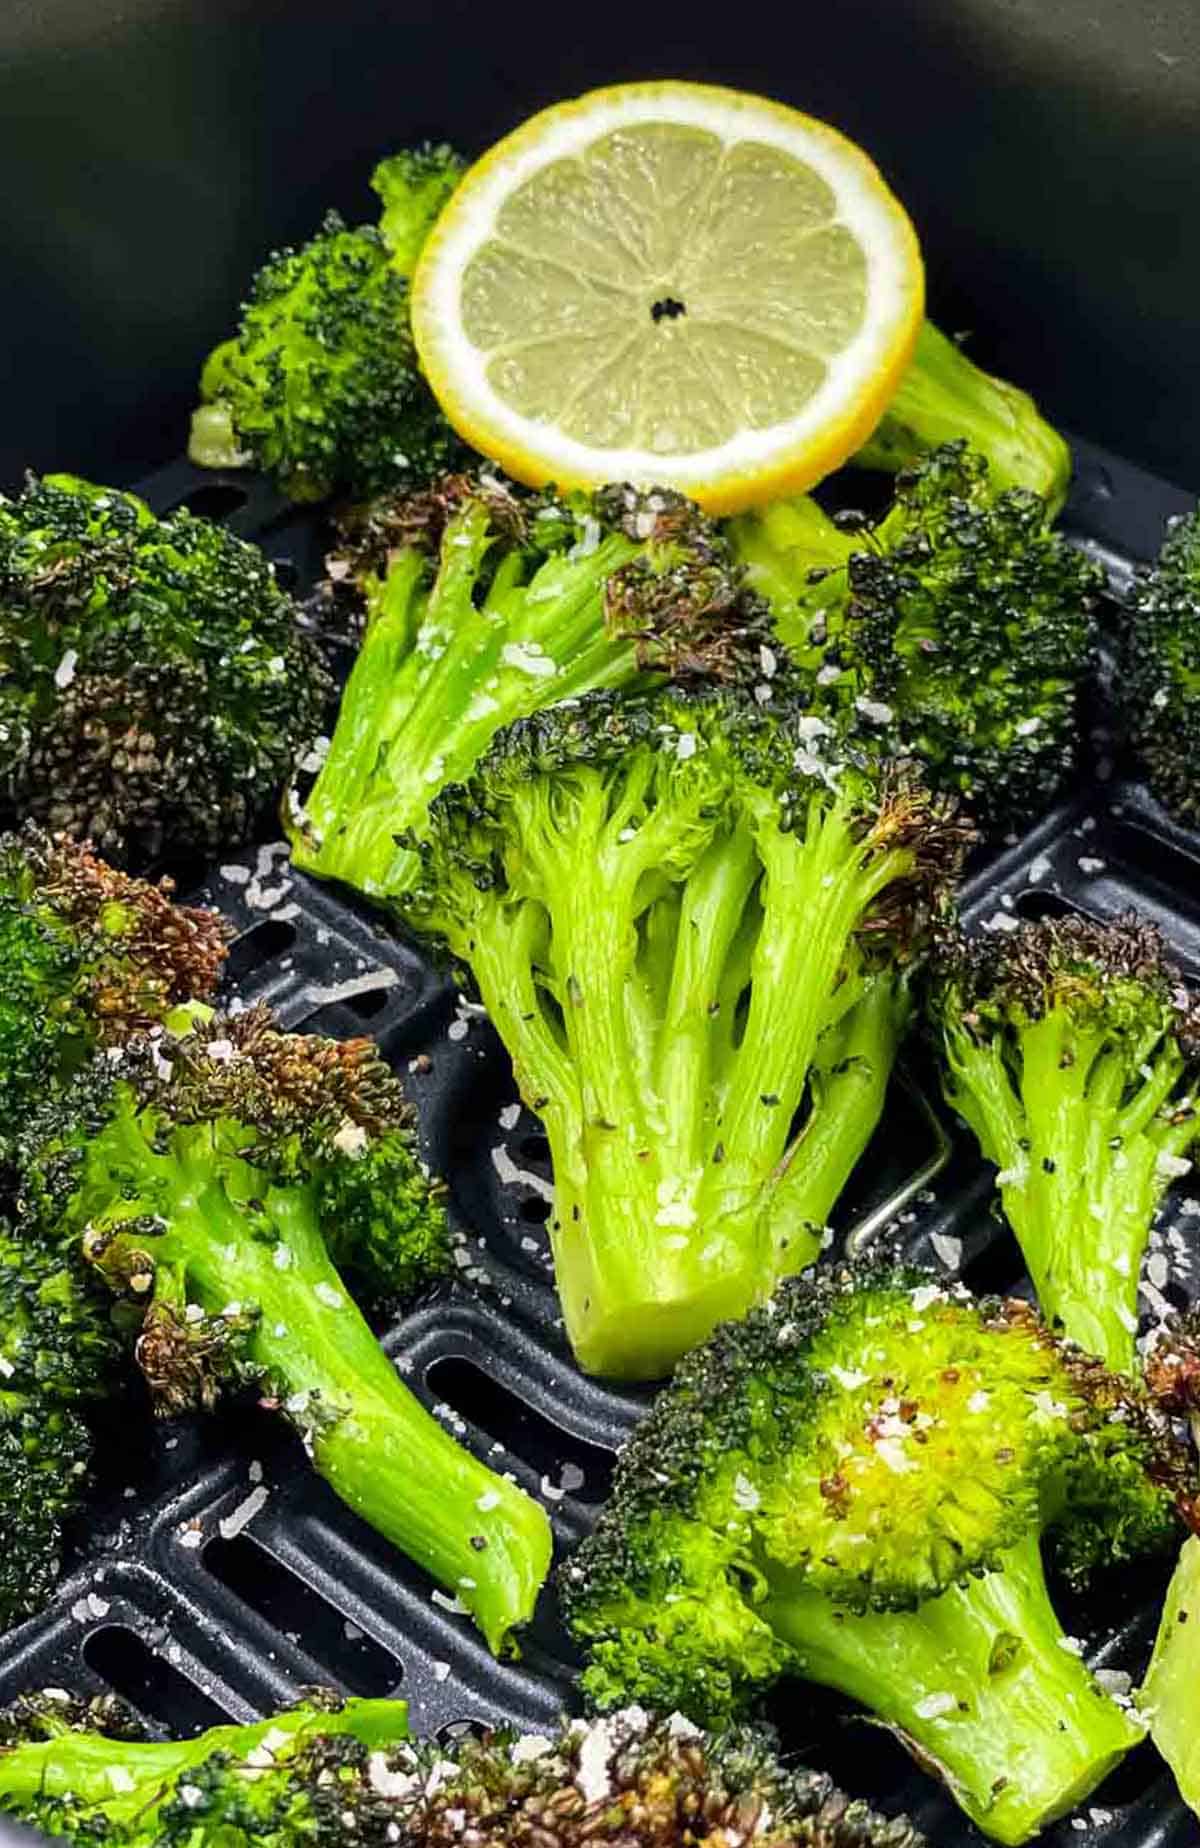 Freshly cooked broccoli with a lemon slice in an air fryer basket.